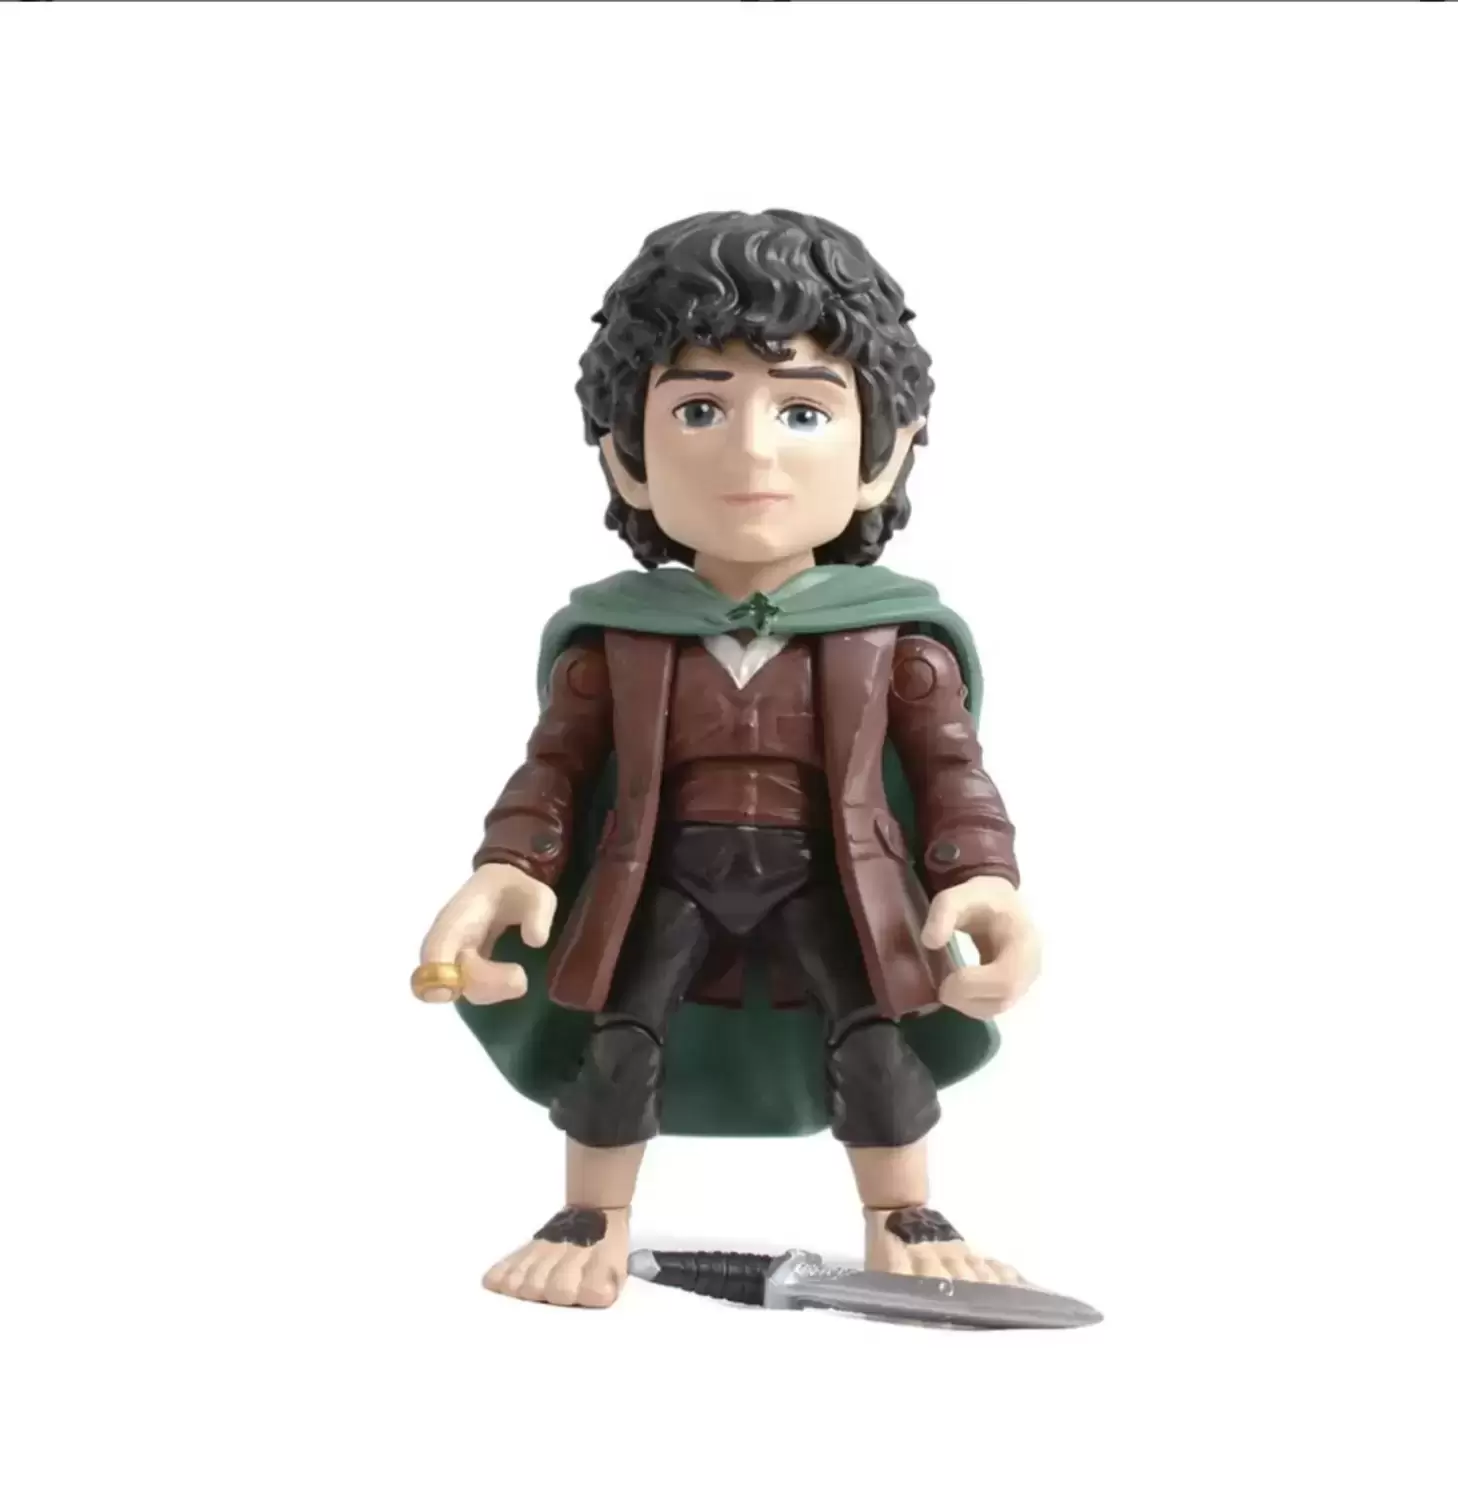 The Lord of the Rings - Frodo Baggins